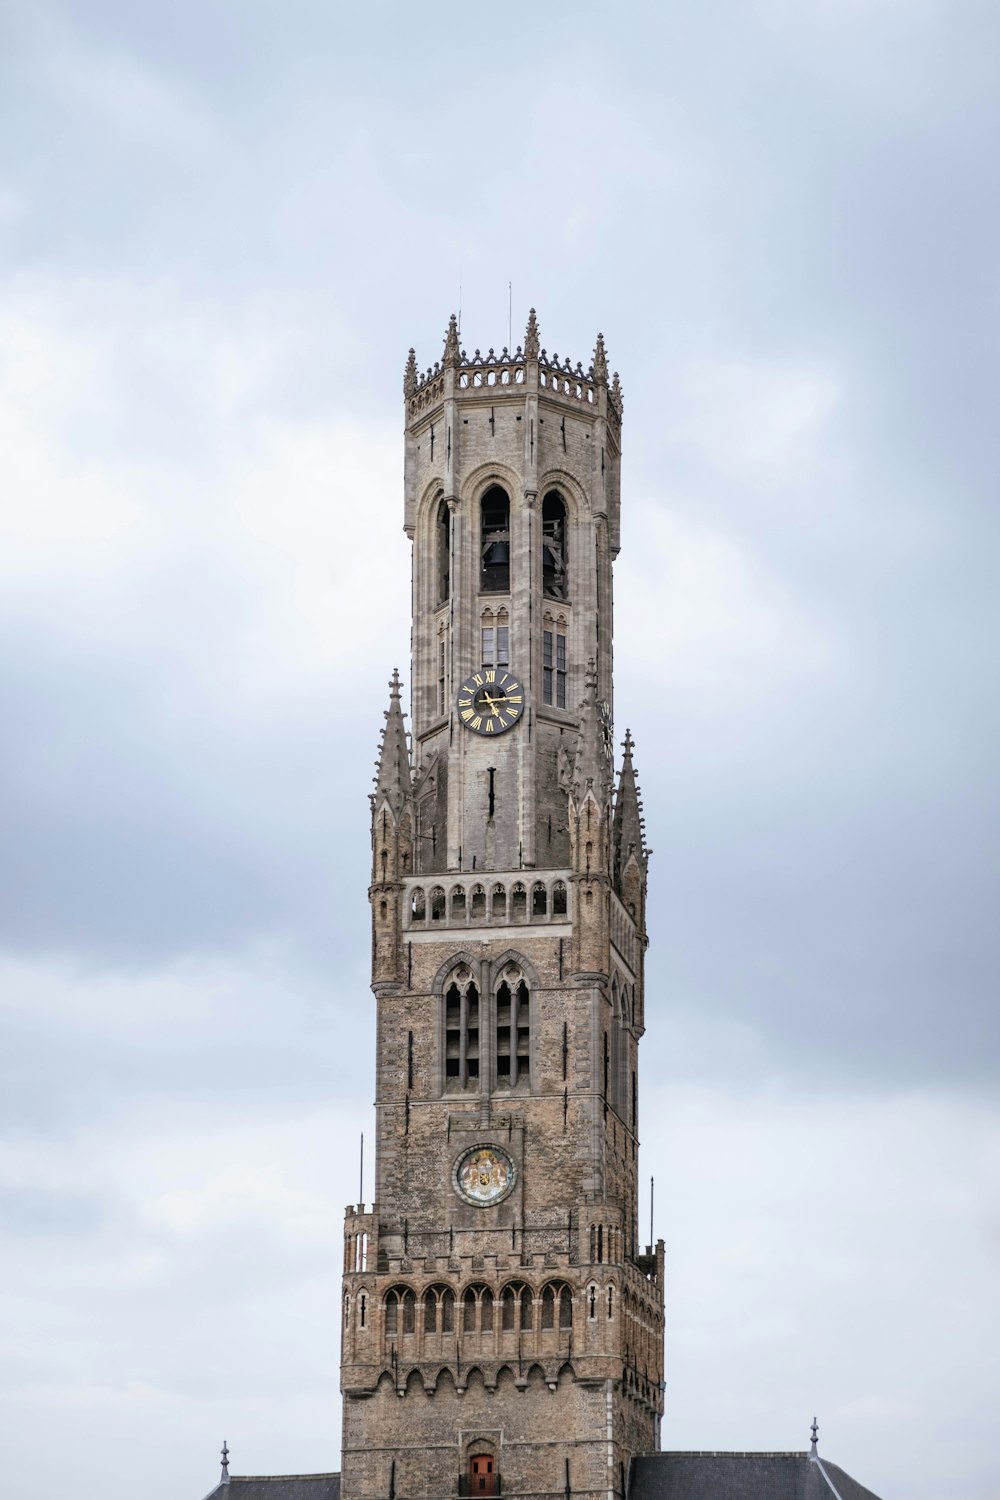 a clock tower with a bell